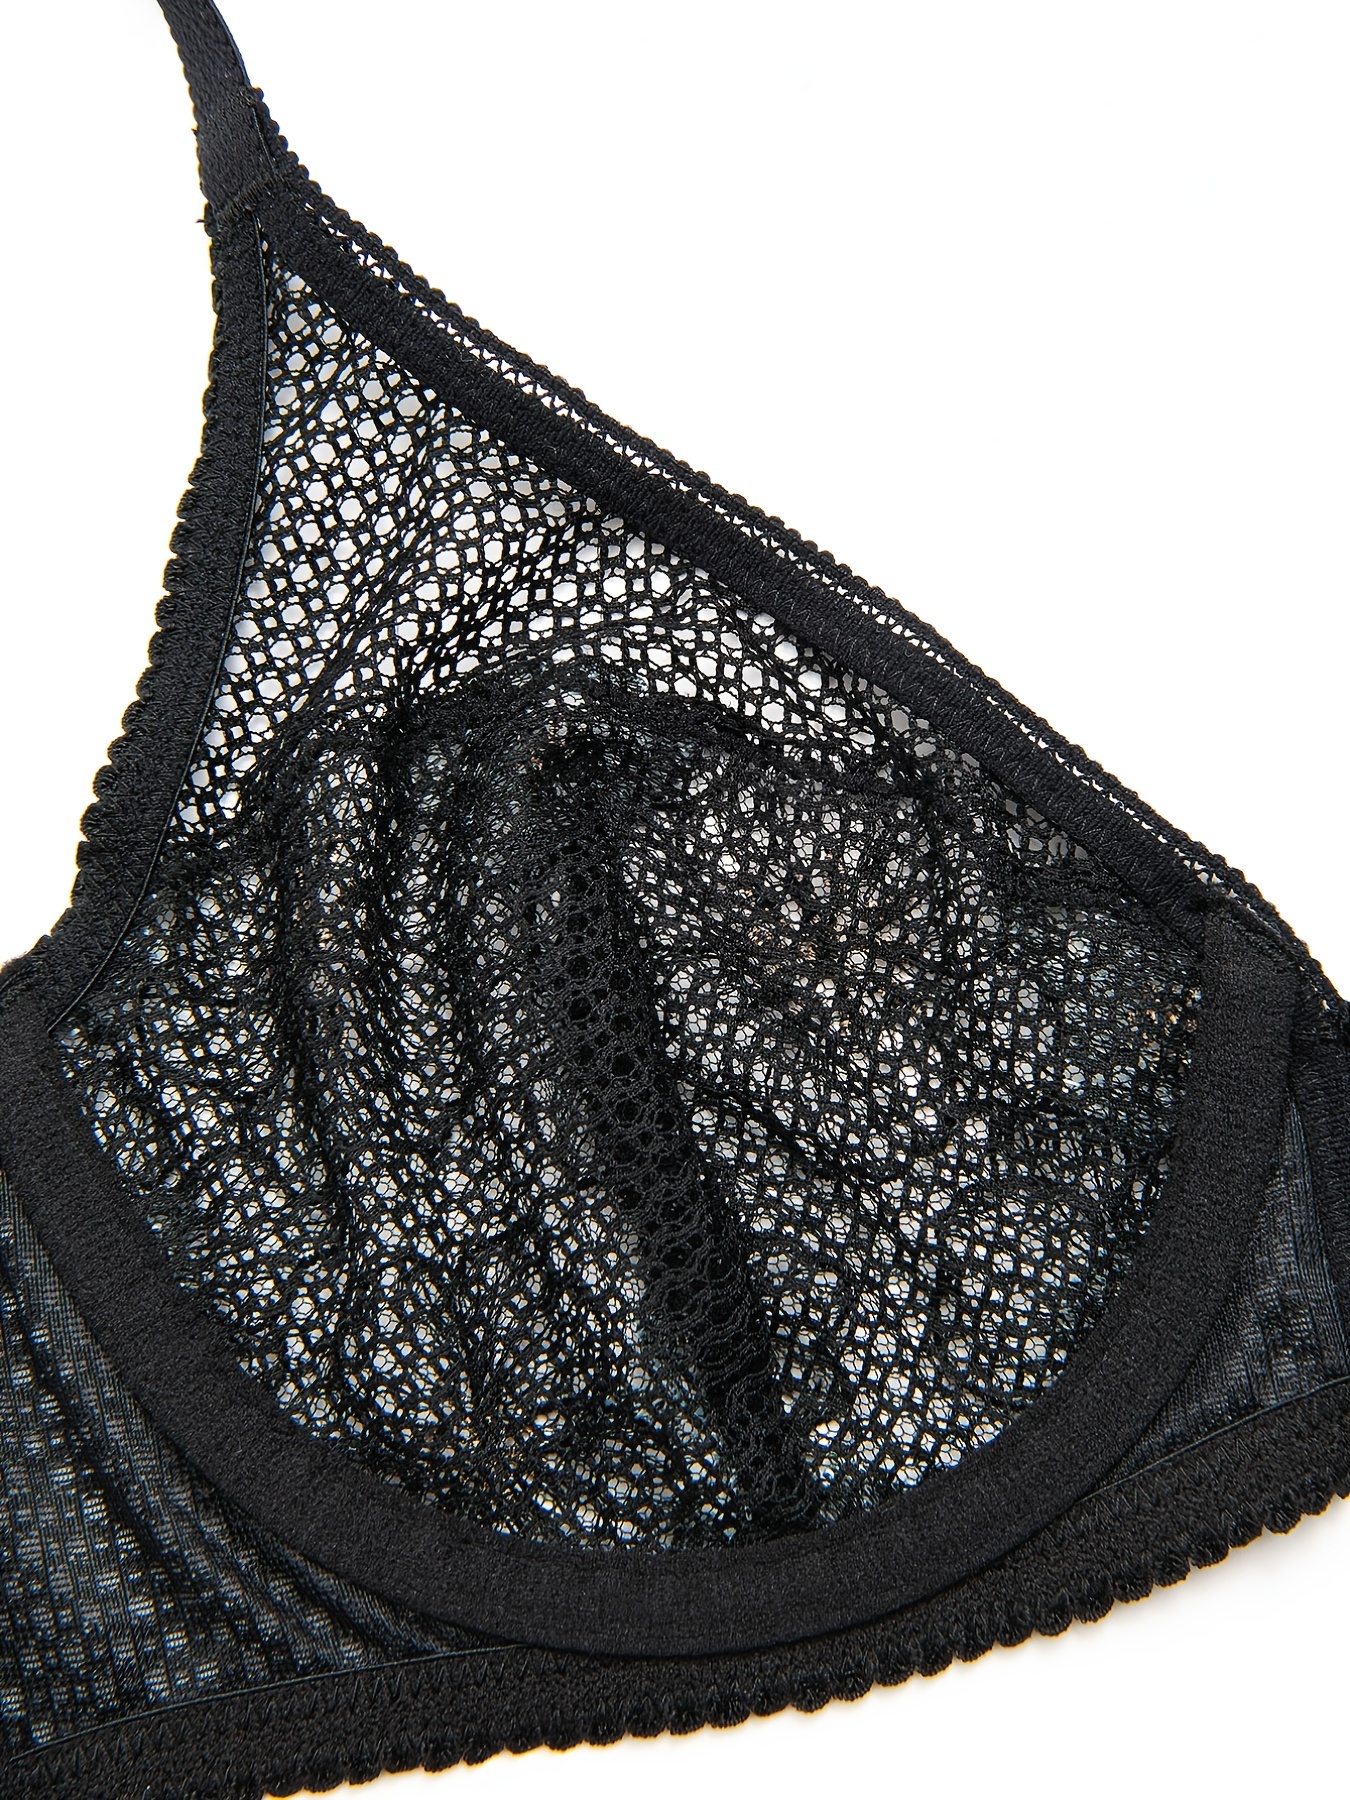  Wingslove Womens Sexy 1/2 Cup Lace Bra Balconette Mesh  Underwired Demi Shelf Bra Unlined See Through Bralette